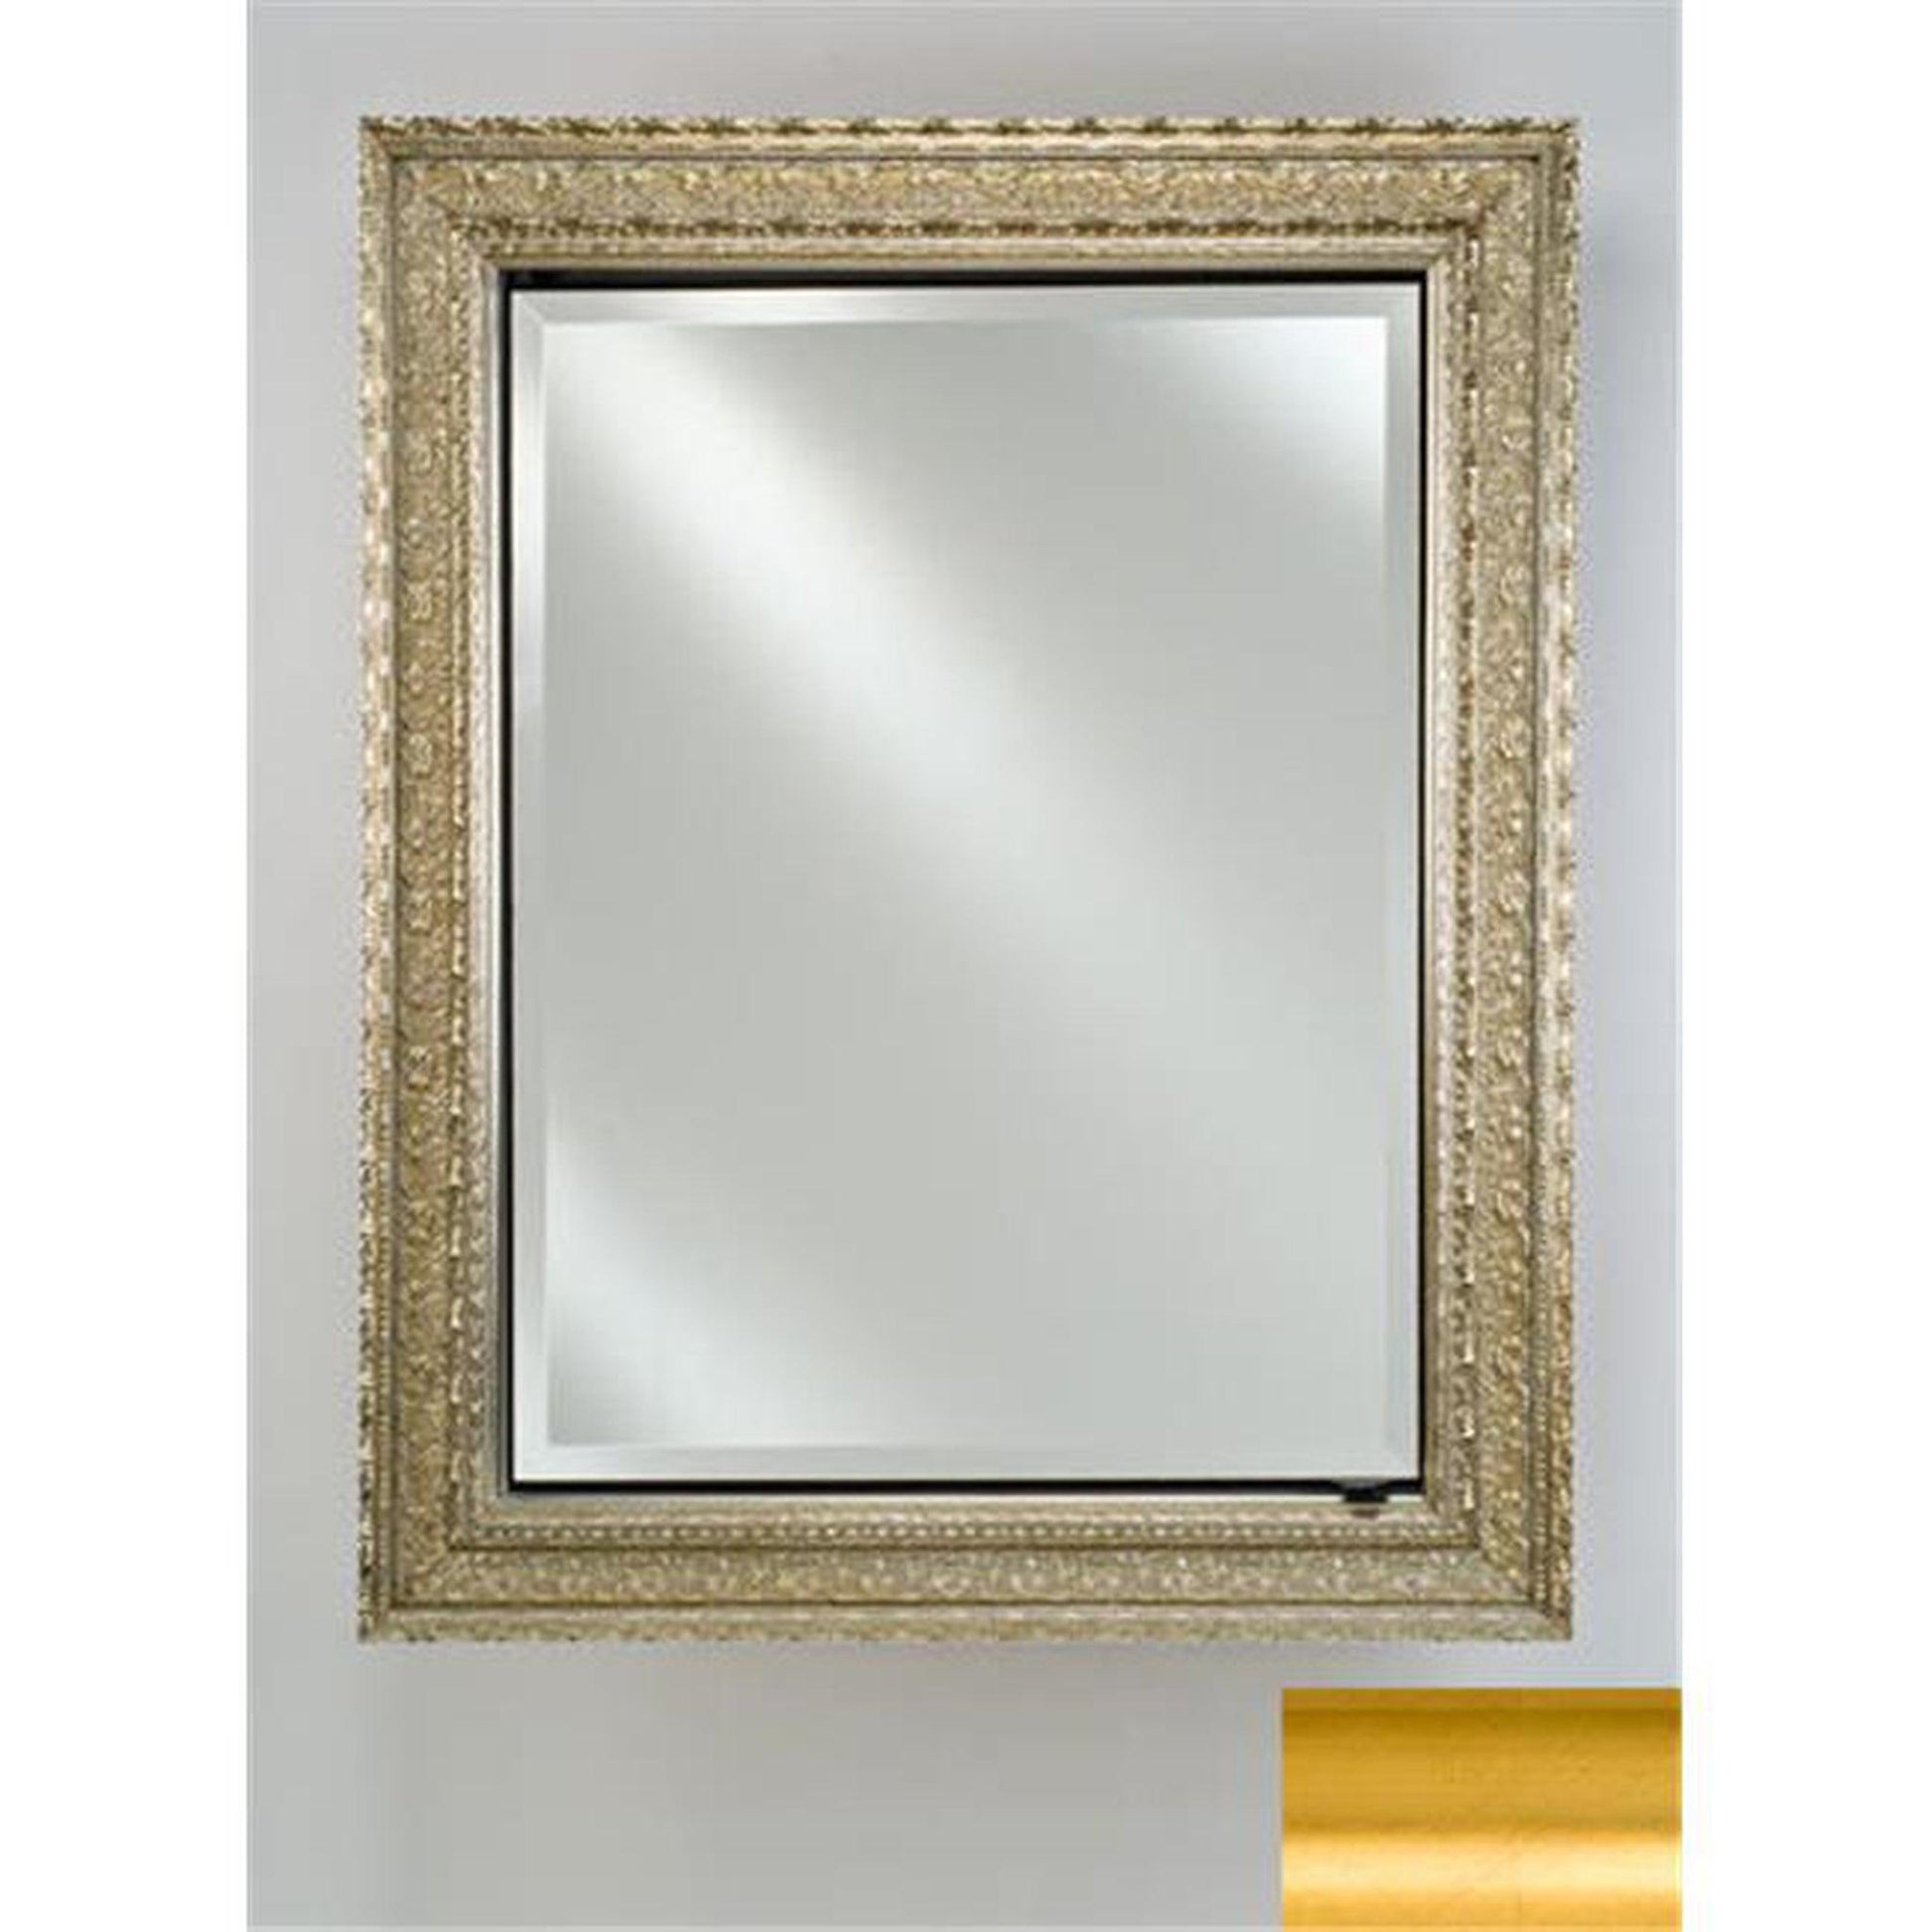 Afina Signature 20" x 30" Brushed Satin Gold Recessed Reversible Hinged Single Door Medicine Cabinet With Beveled Edge Mirror